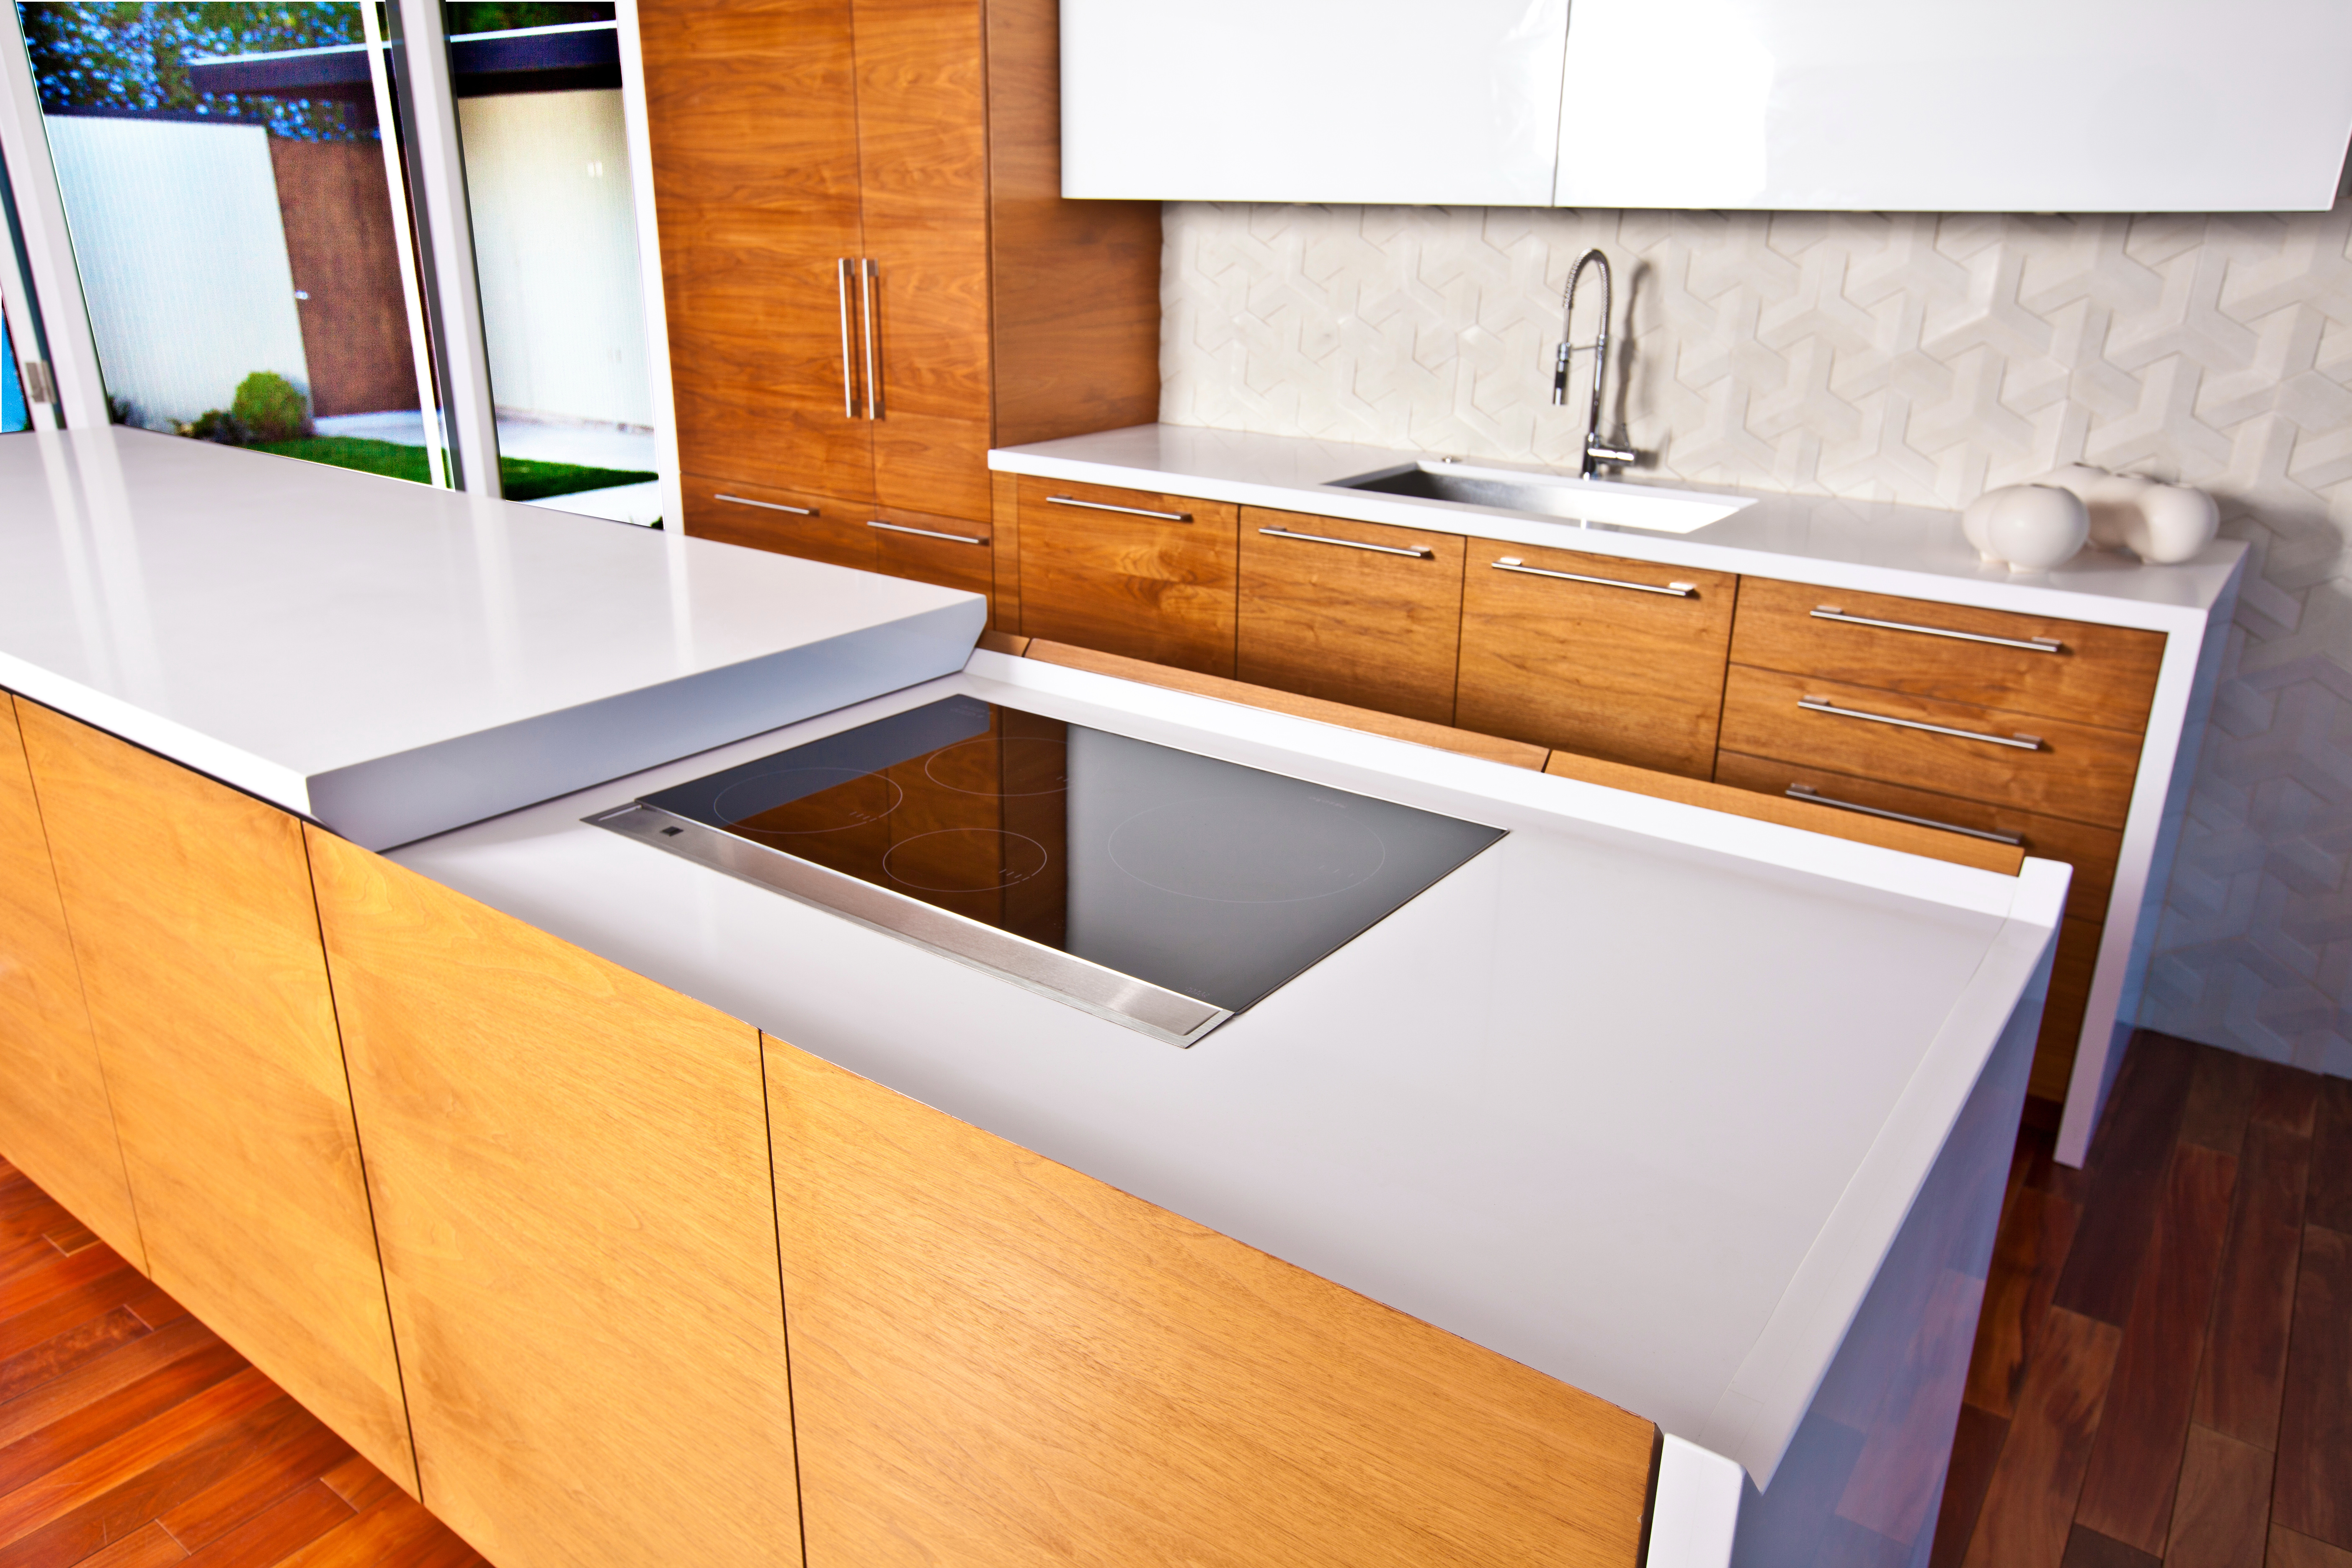 Bradco S Slide N Hide Countertop Featured At Dwell On Design